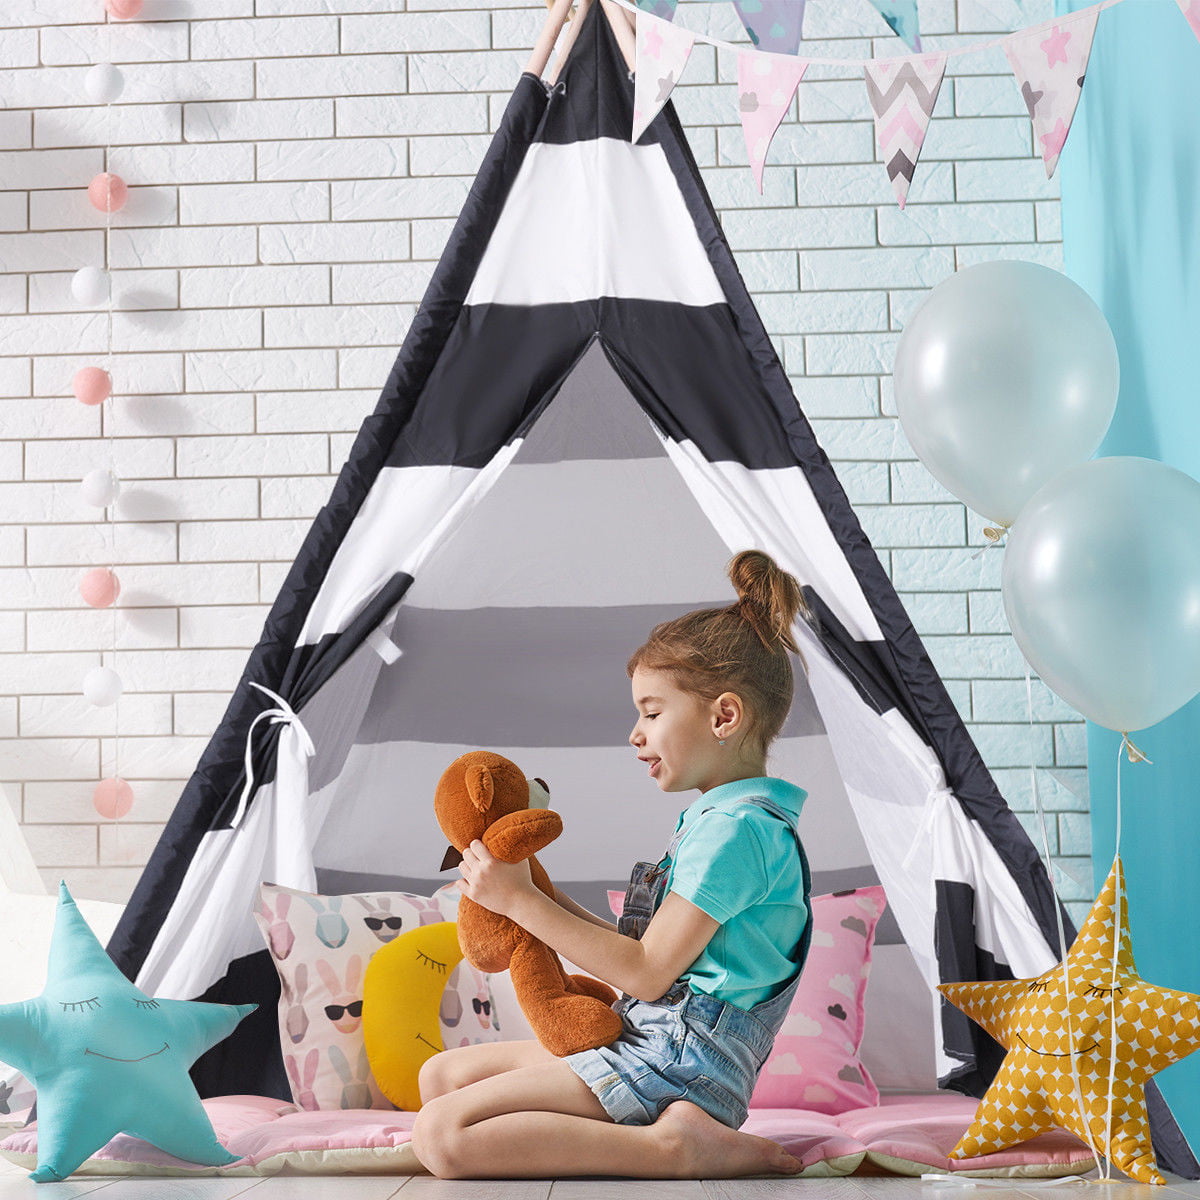 Portable Children Indian Play Tent Pop Up Teepee Sleeping Playhouse Toy for Kids 